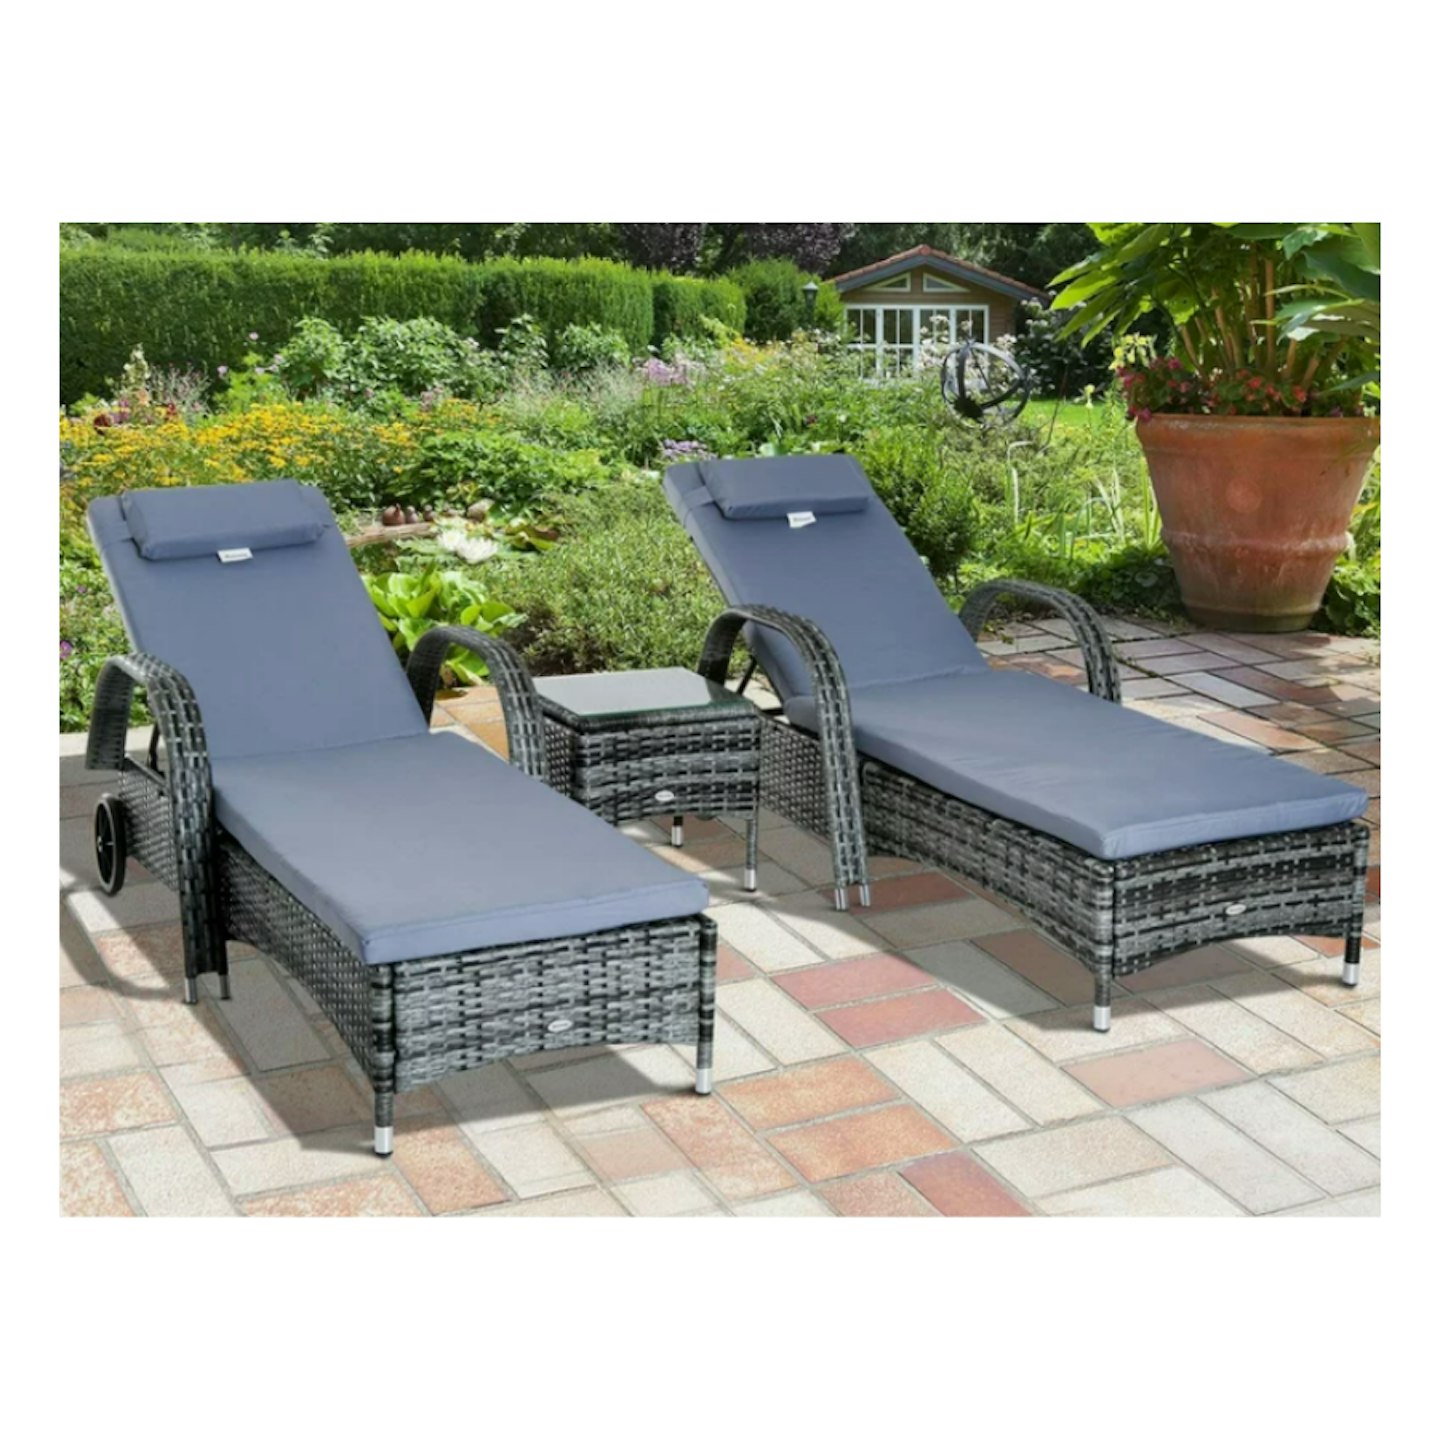 Berkhamsted 200Cm Long Reclining Sun Lounger Set with Cushions and Table